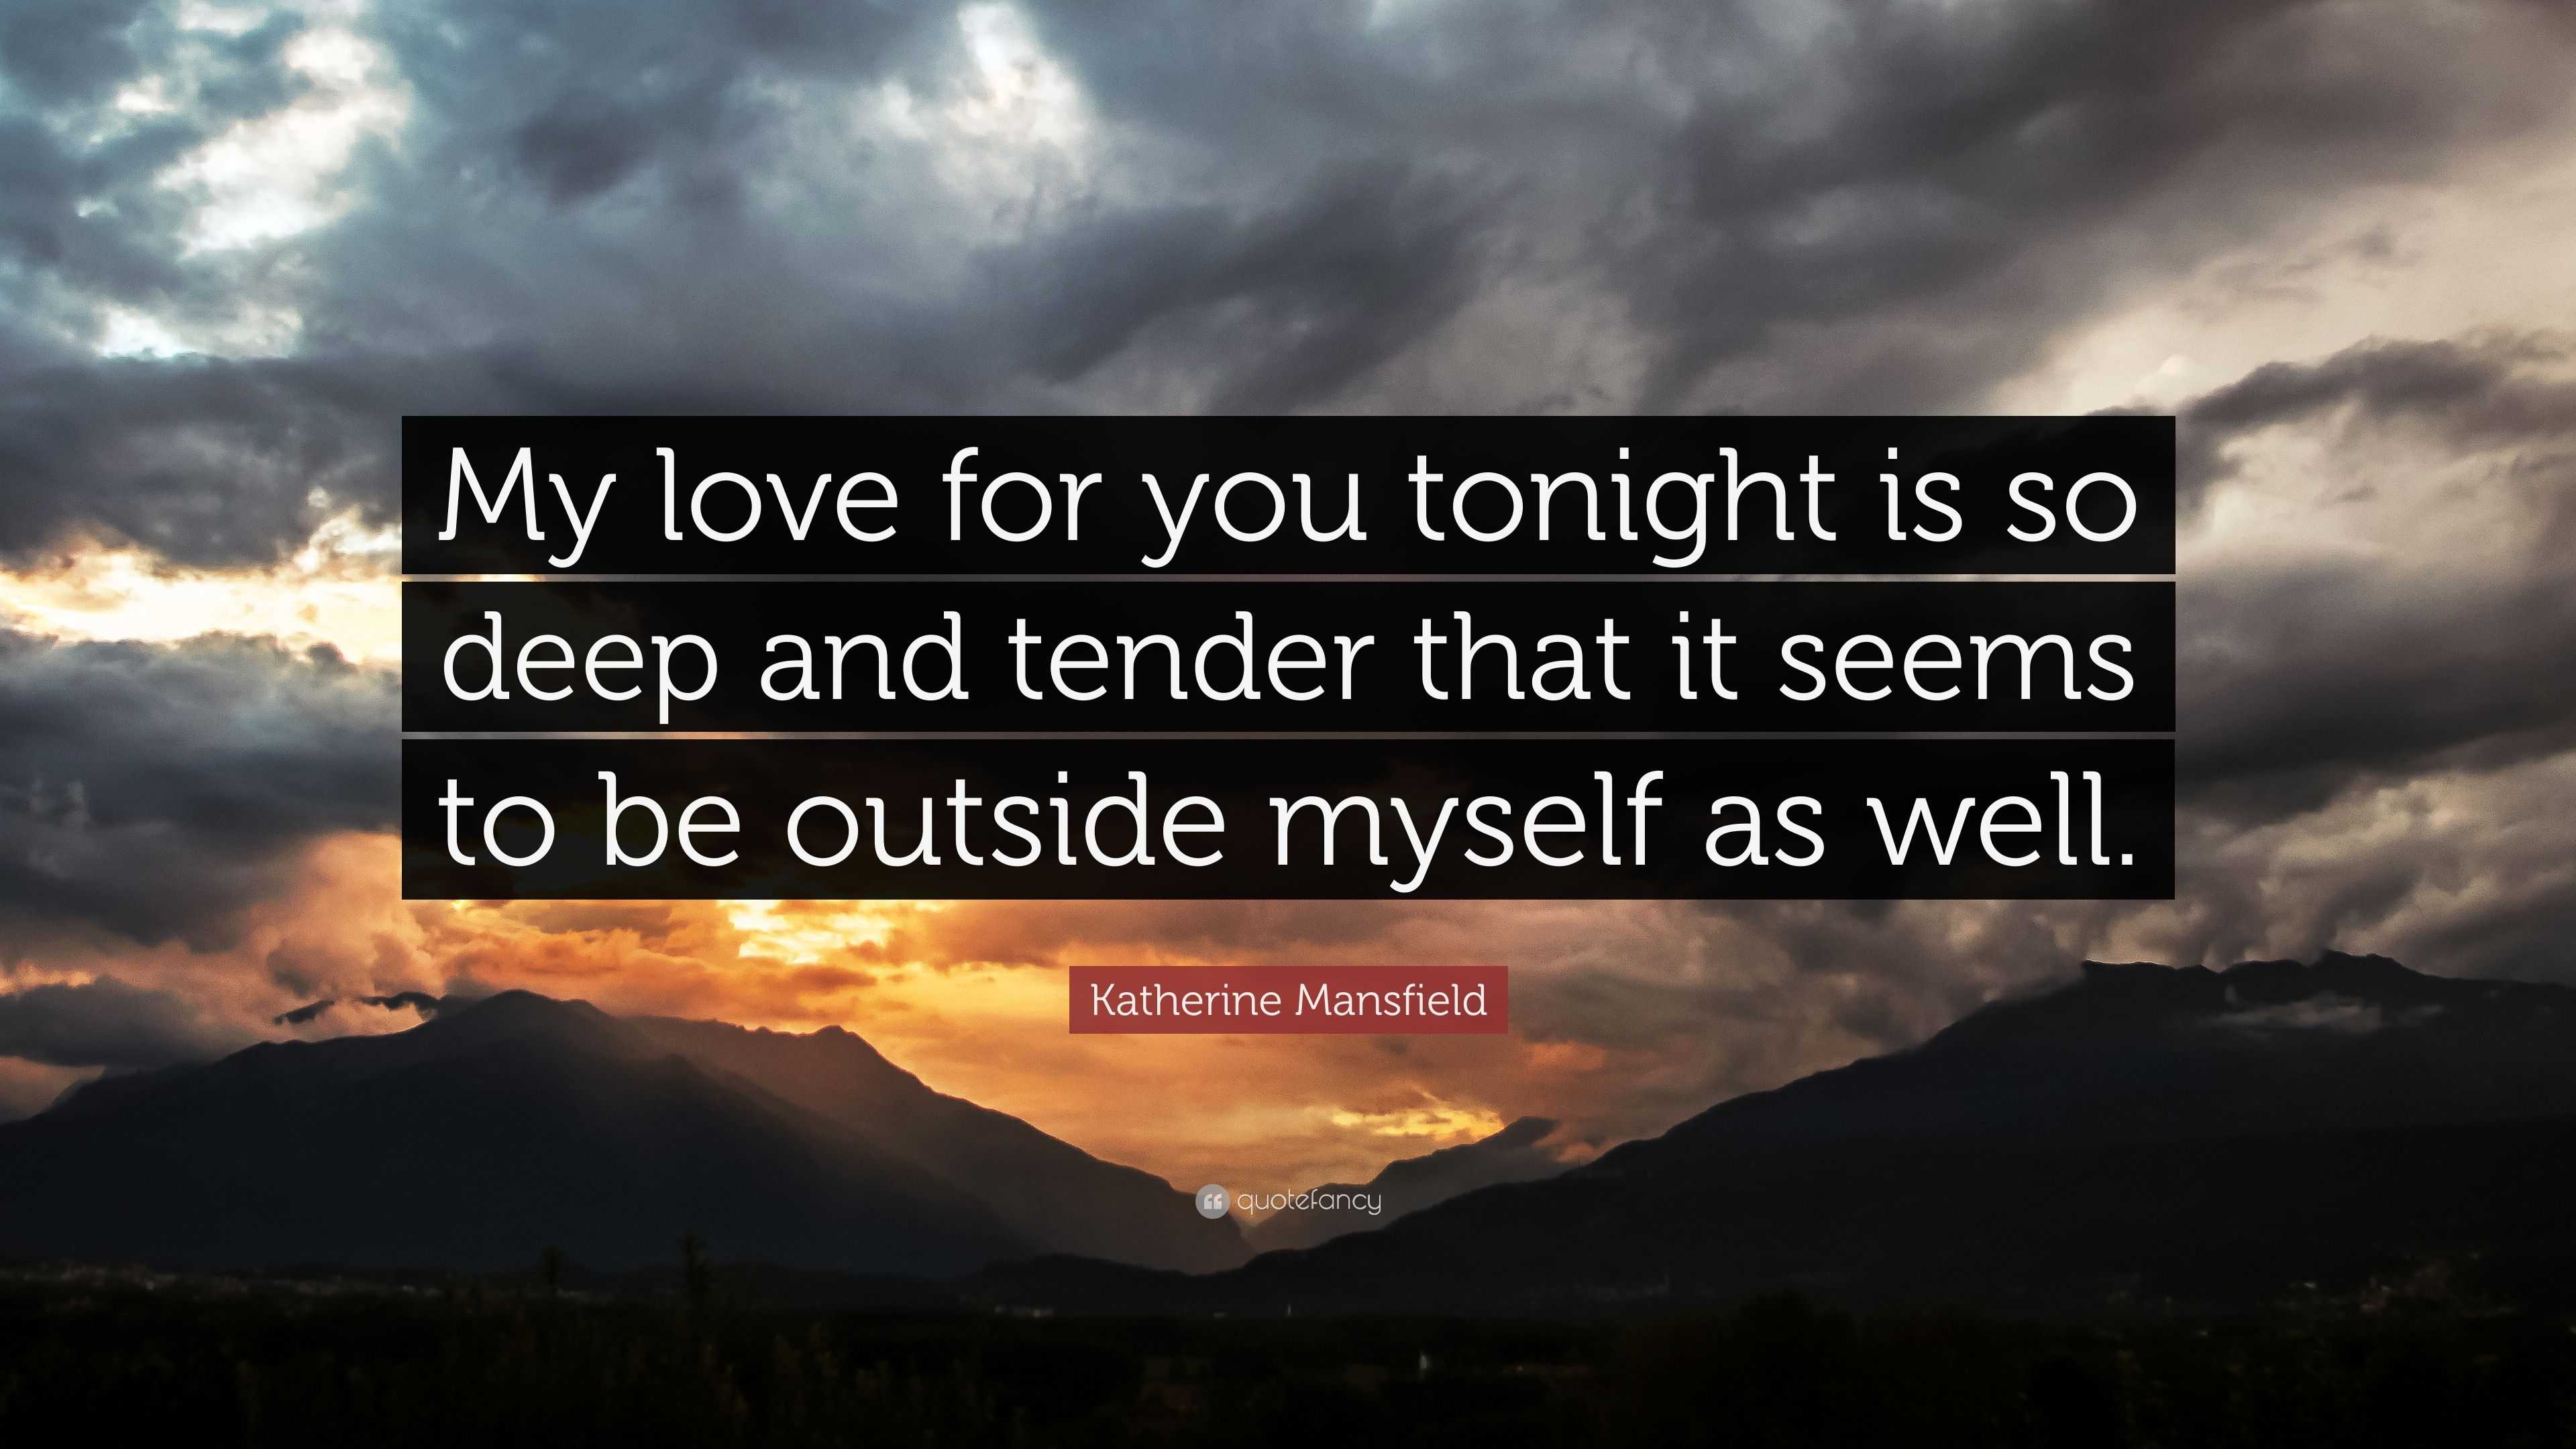 Katherine Mansfield Quote “My love for you tonight is so deep and tender that